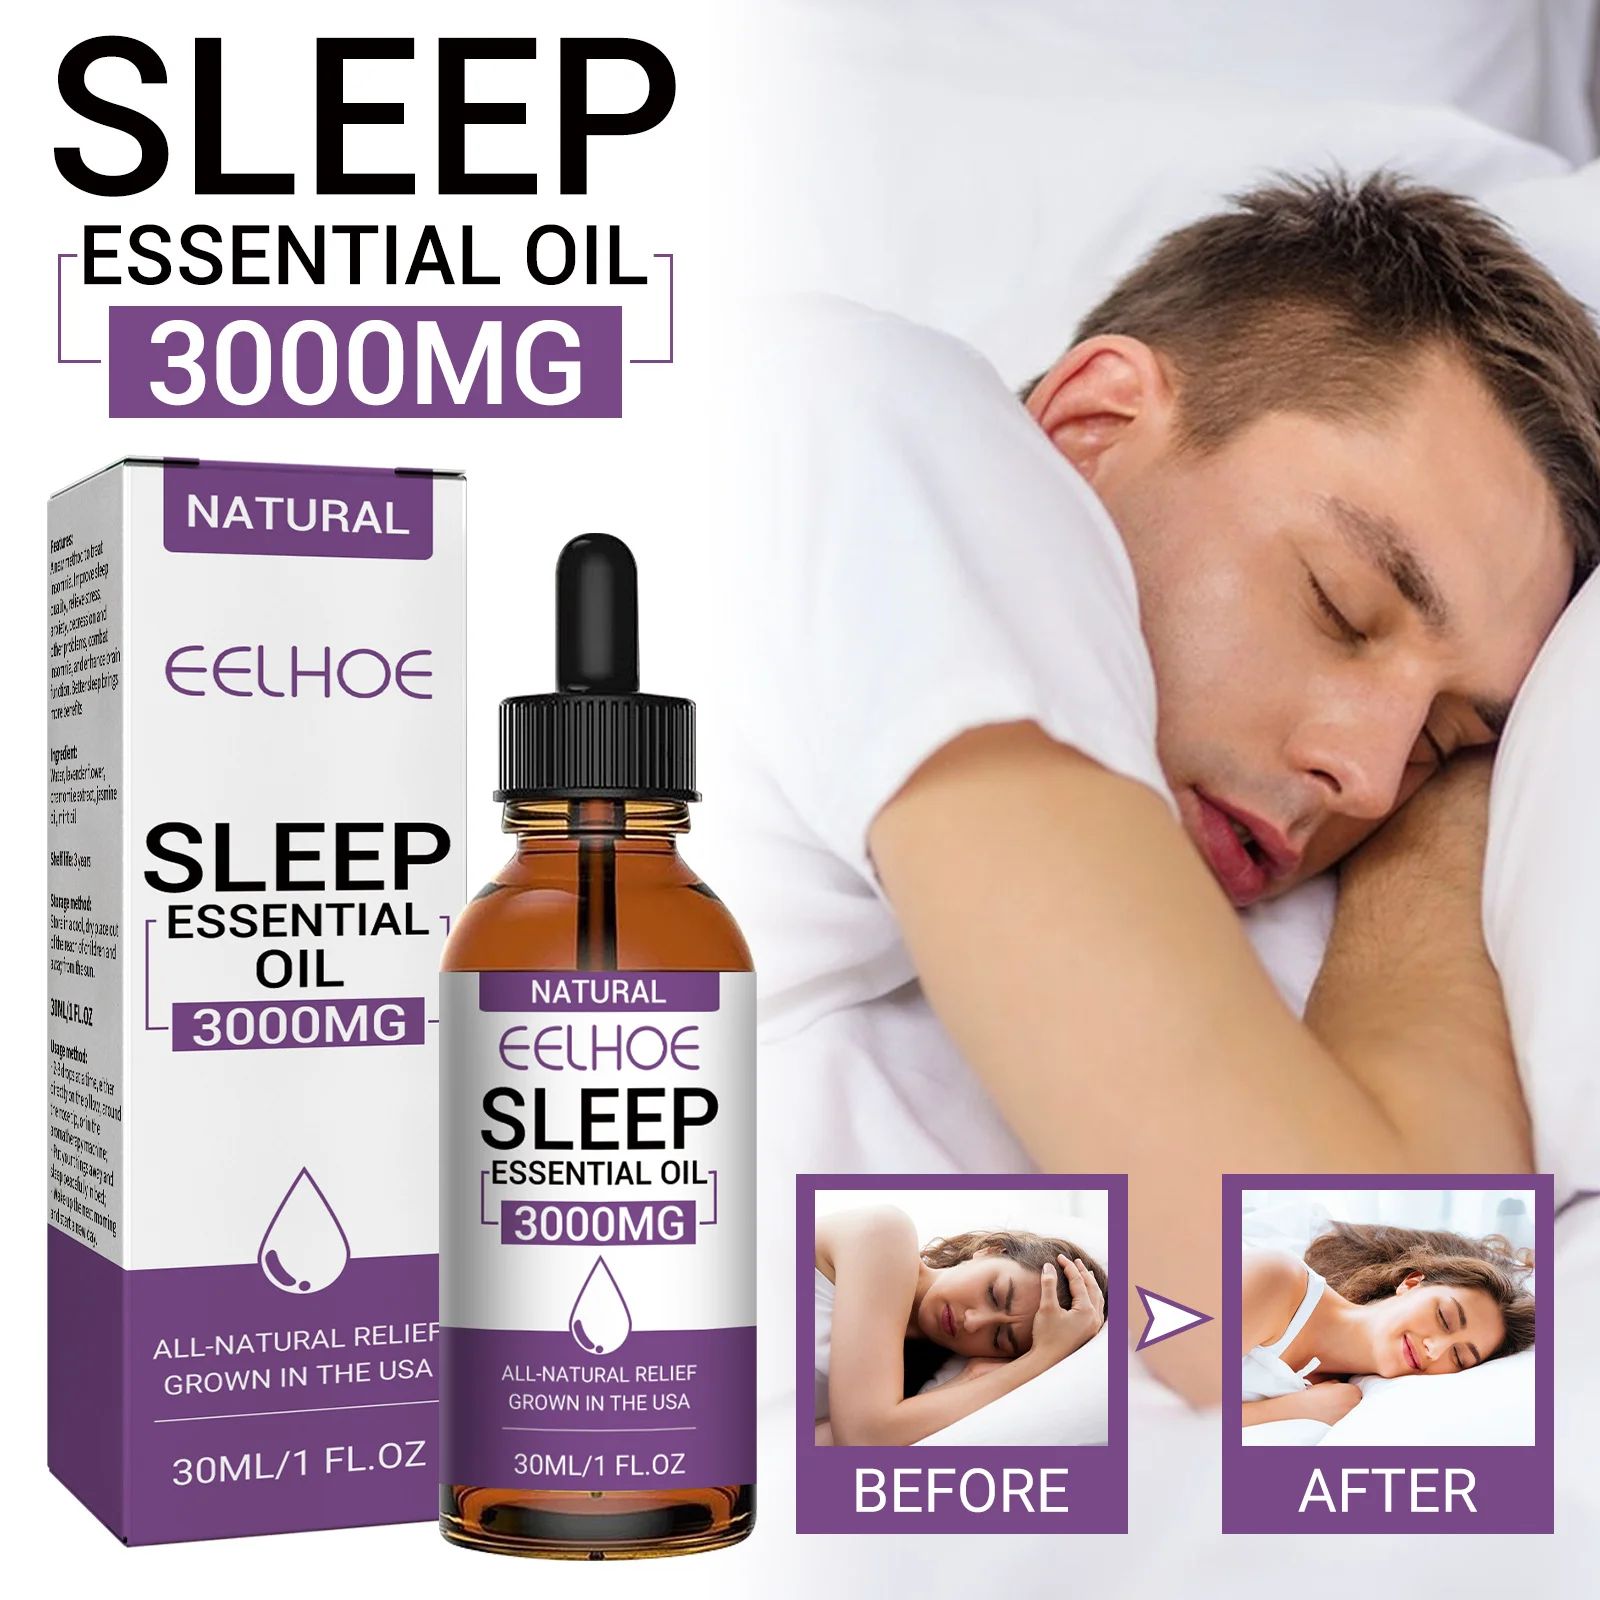 

Lavender Sleep Essential Oil Soothing Mood Relieve Anxiety Improve Insomnia Relax Aromatherapy Deep Sleep Aid Oil Products 30ml